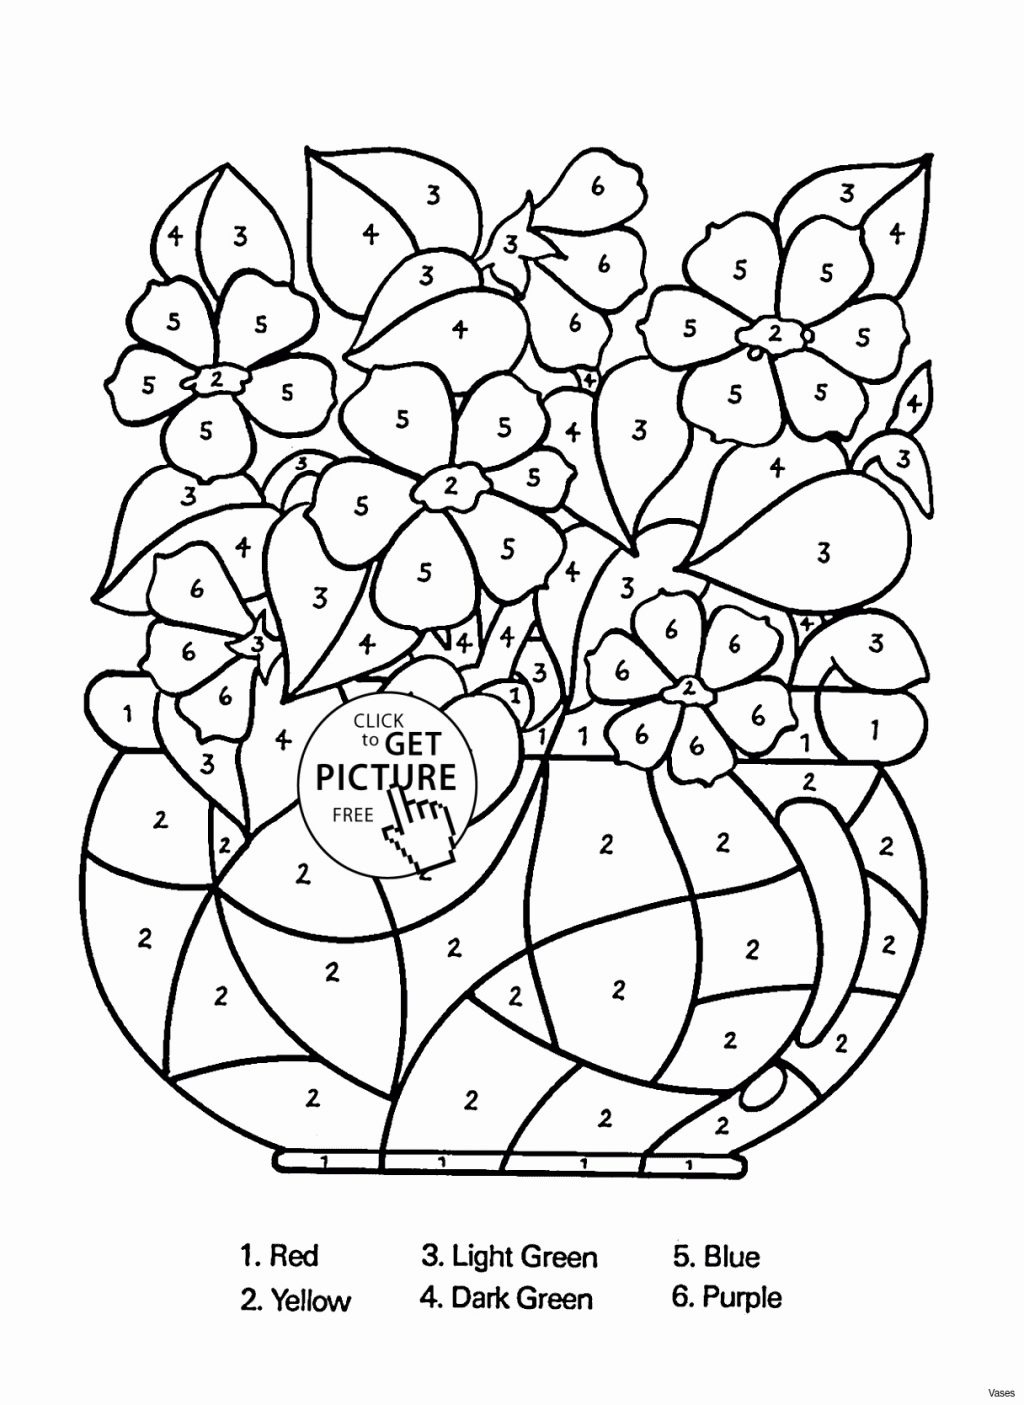 Coloring Page ~ Free Printable Astronaut Coloring Pages For Kids R - Free Anatomy Coloring Pages Printable